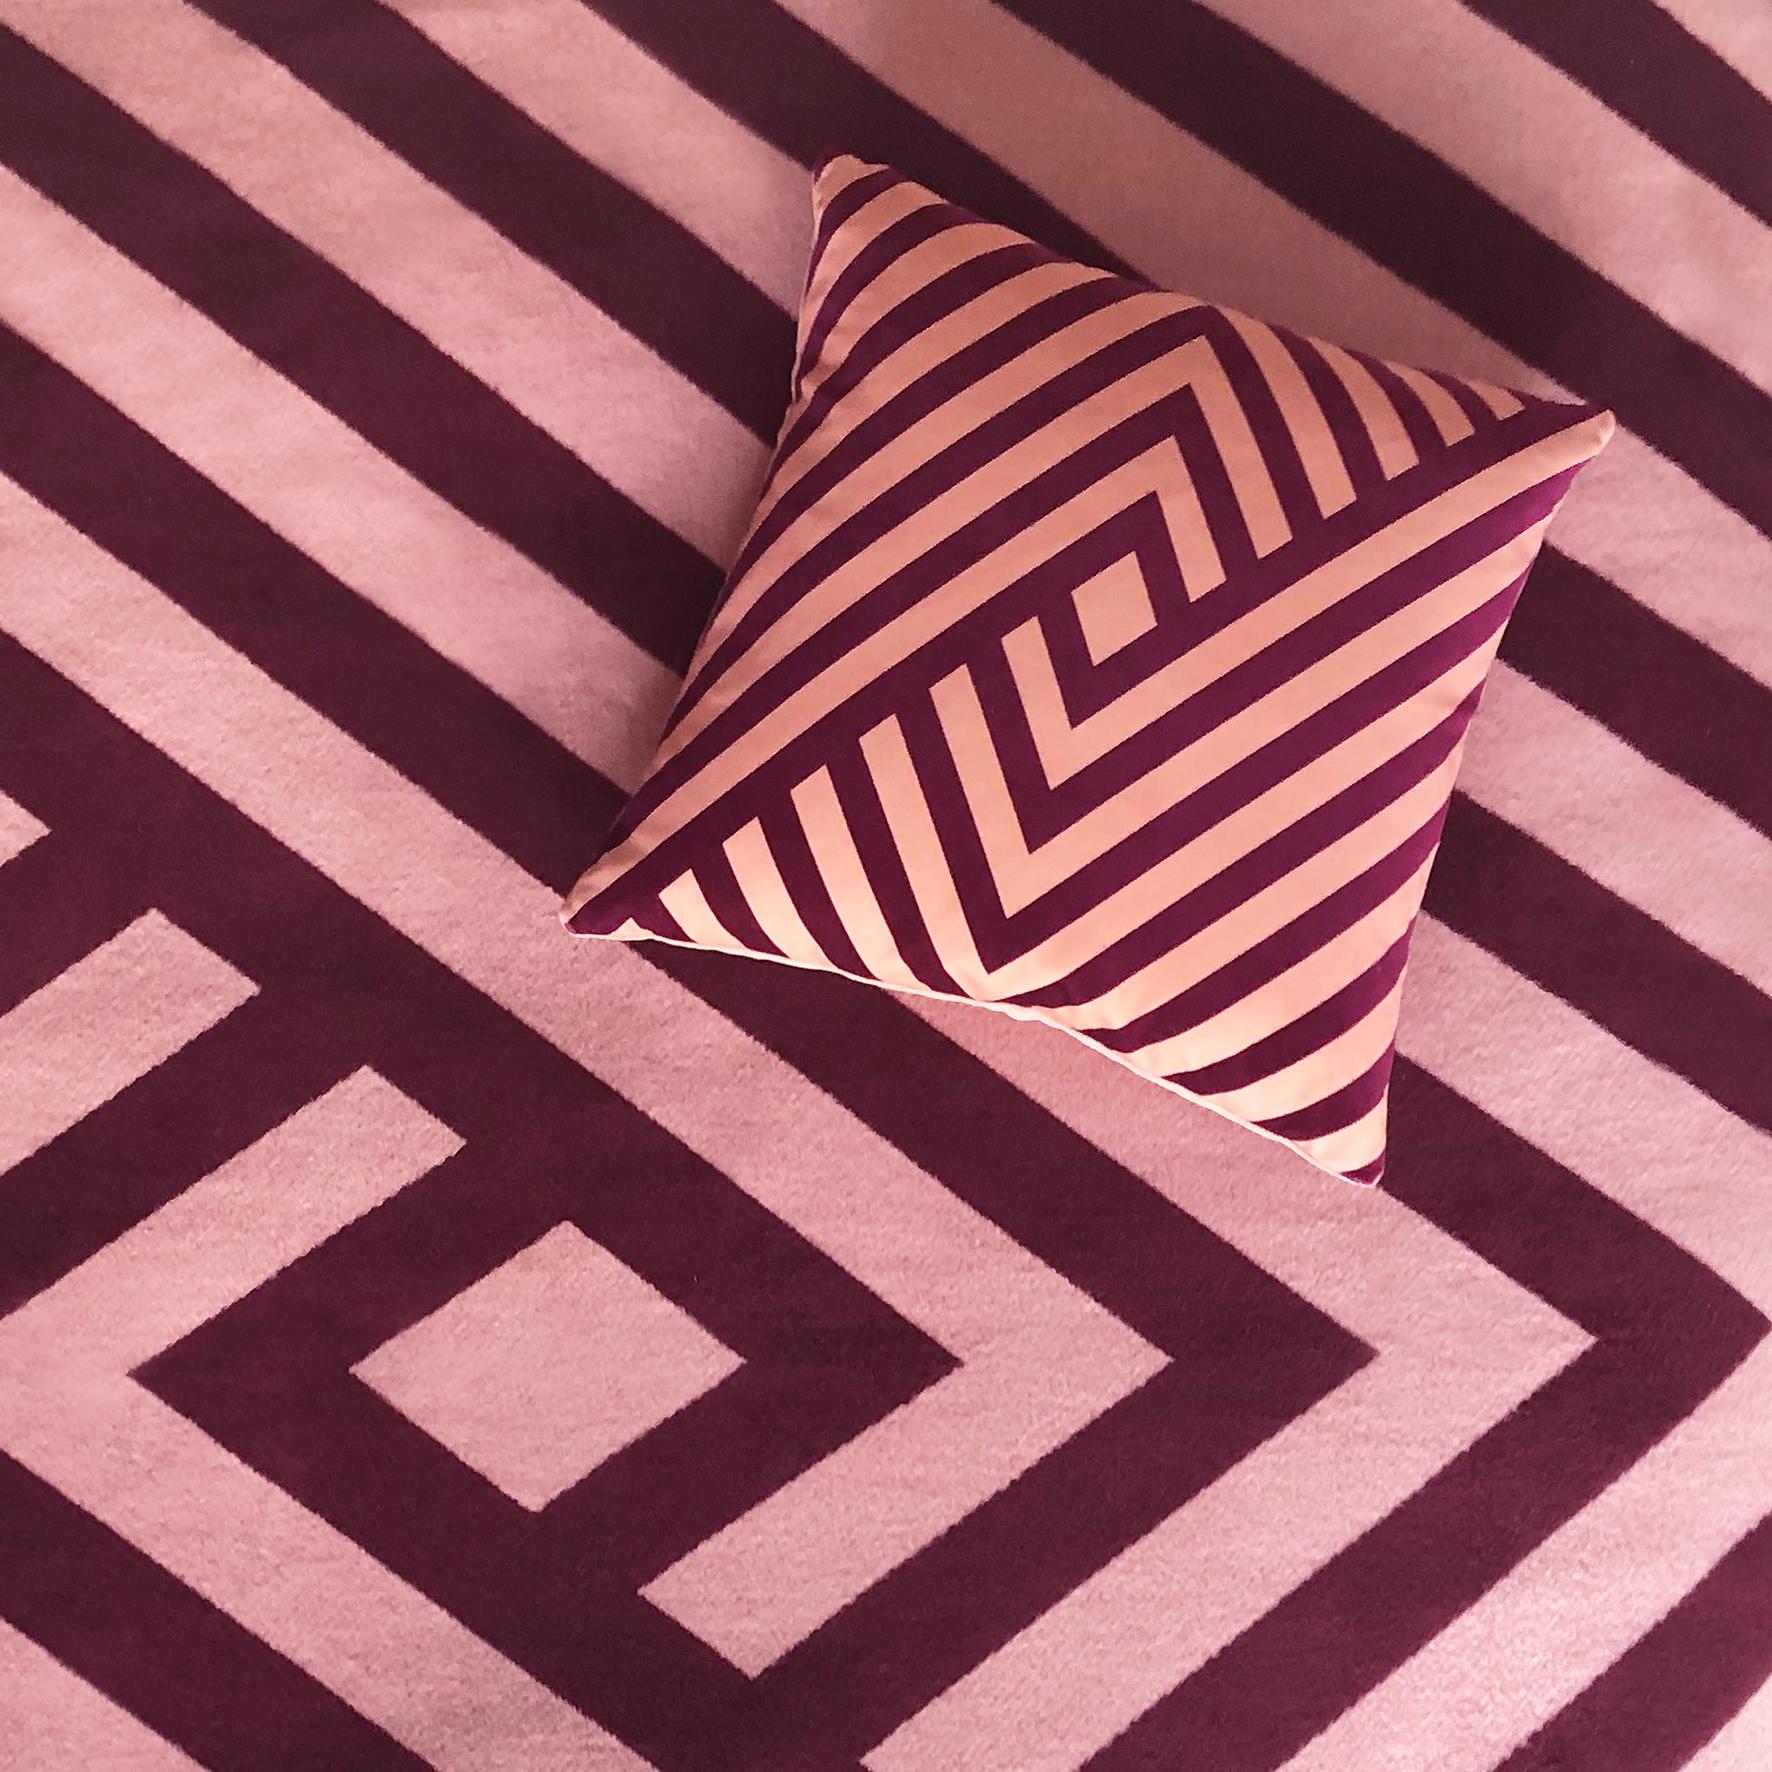 The Dorsey cushion was designed after a trip to Palm Springs, seeing the cities streamlined mid-century architecture set within the desert. The inspiration for the striped geometric pattern came from the colourful sunsets, the suns vibrant rays of